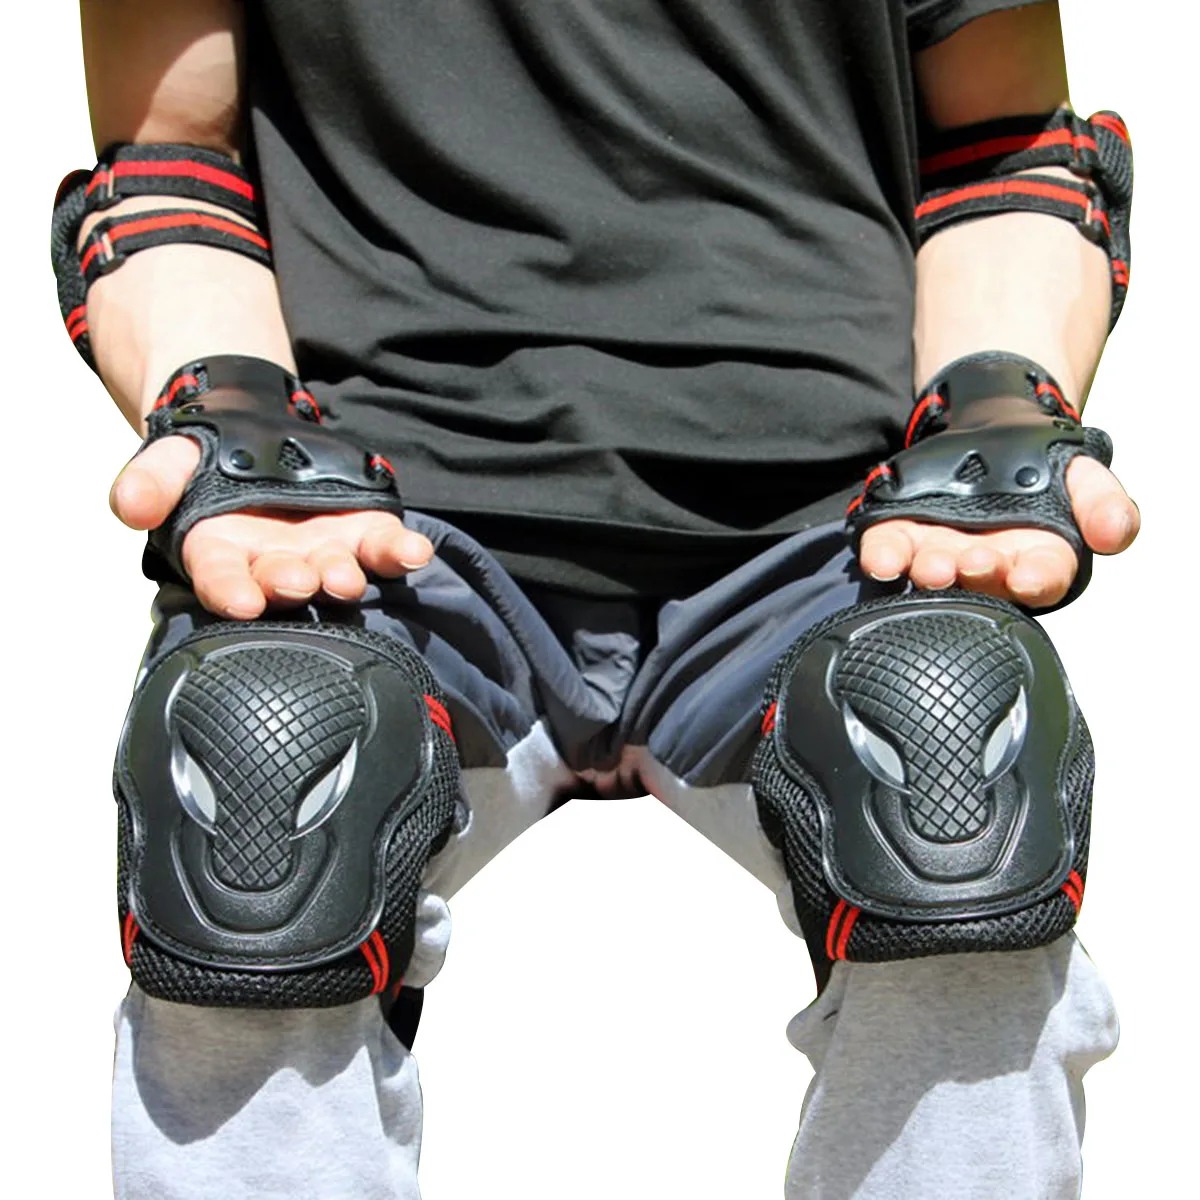 GAOAG Adults Youth Knee Elbow Pads and Wrist Guards Adjustable Safety Protective Gear Set for Cycling Skatrboard Inline Skating 